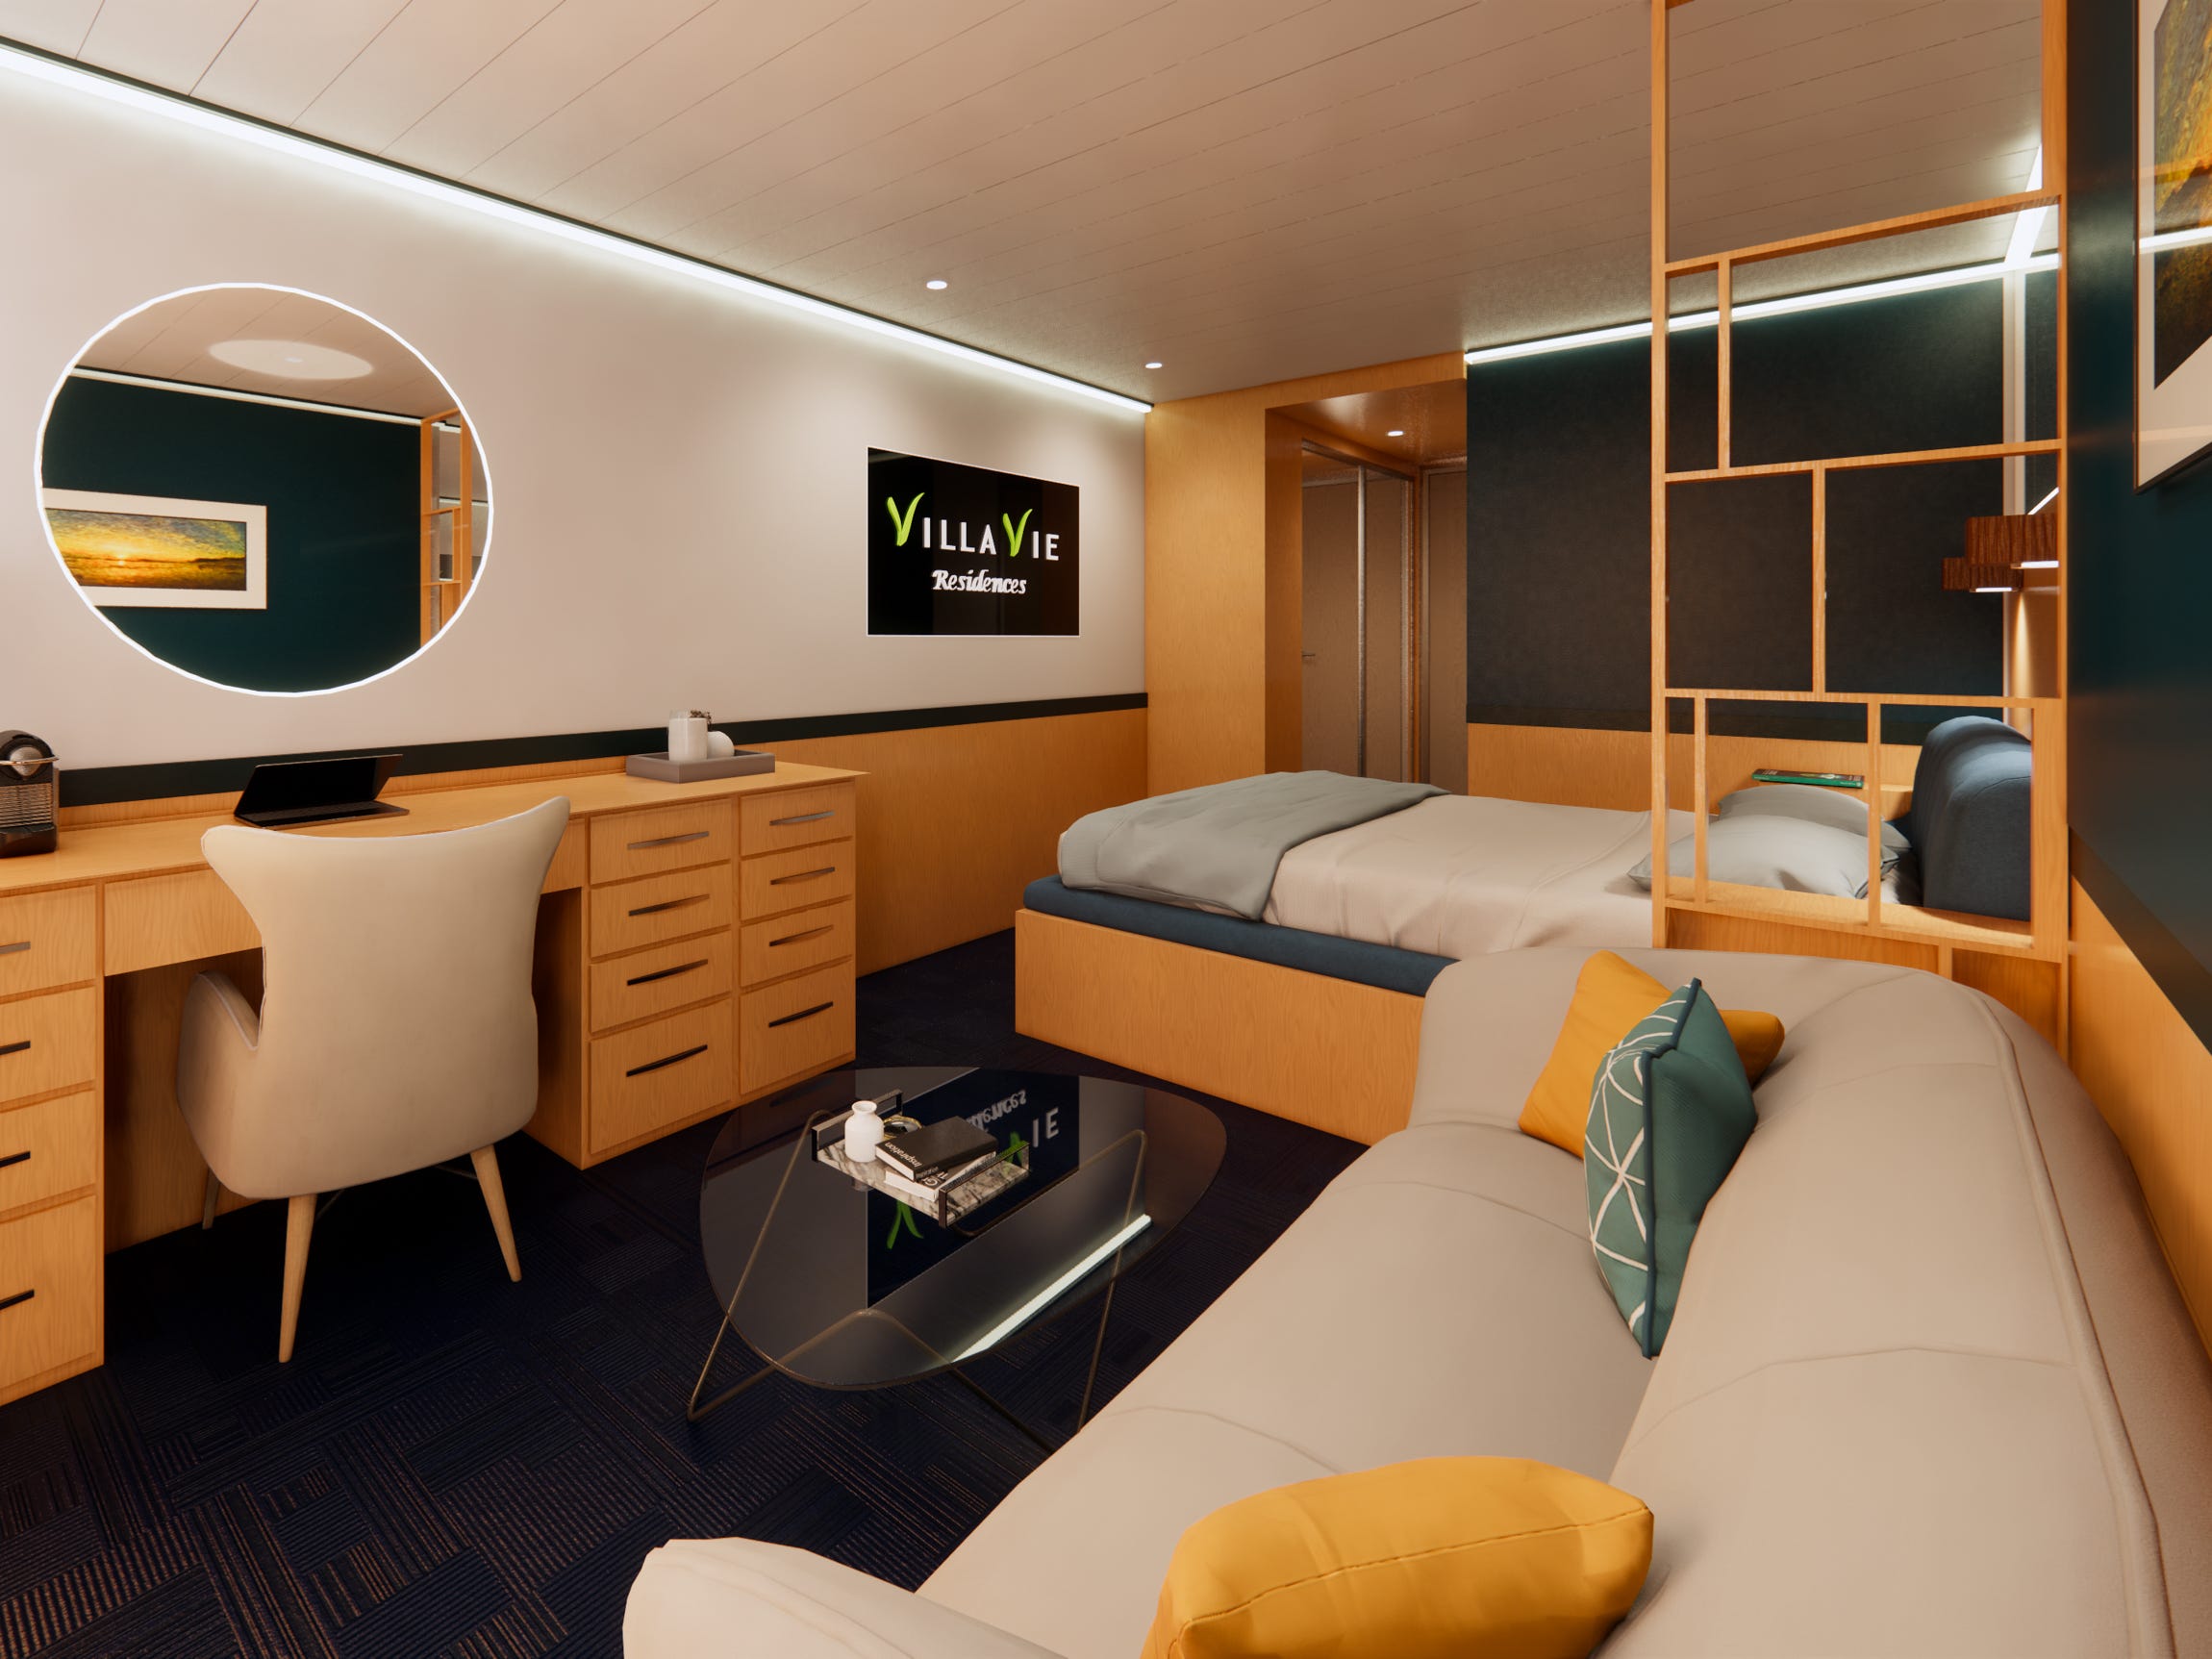 A rendering of a stateroom on Villa Vie's upcoming cruise ship with a bed, couch, tables